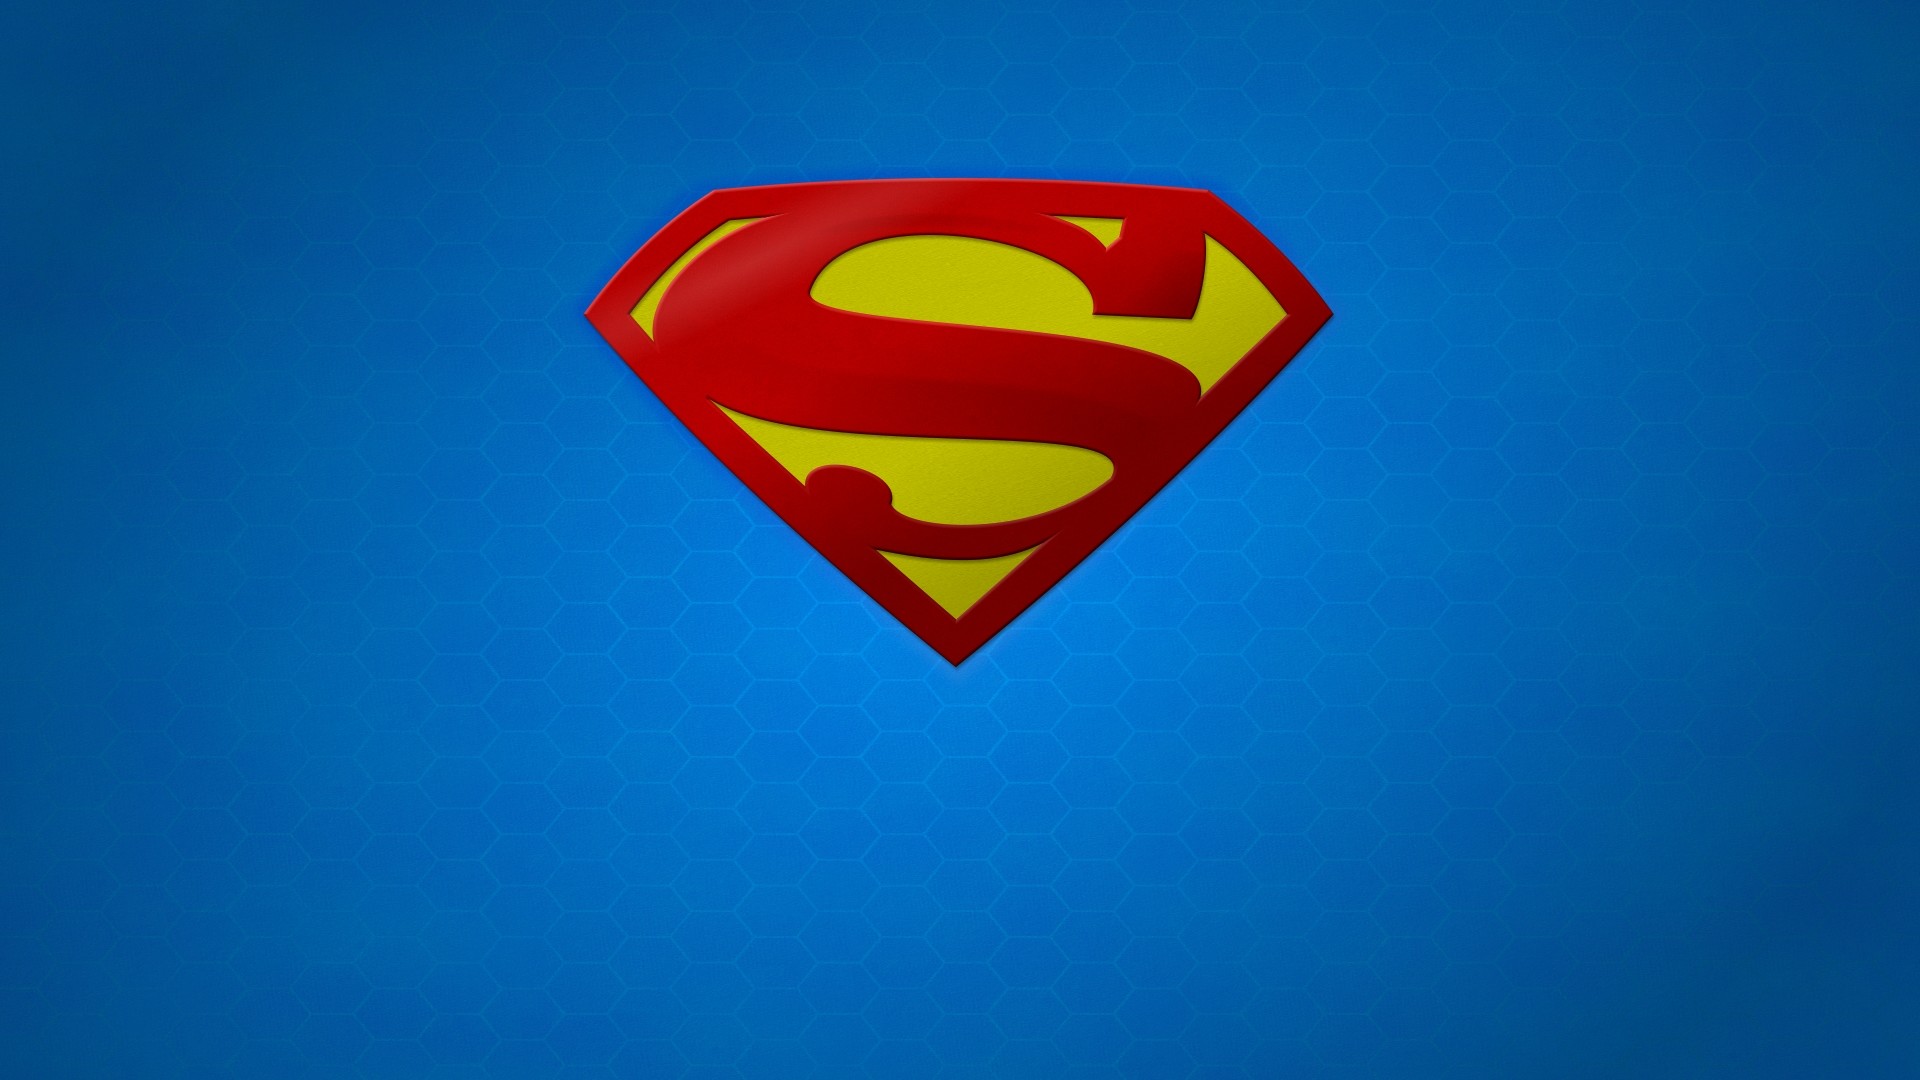 1920x1080 Superman background Superman wallpapers 